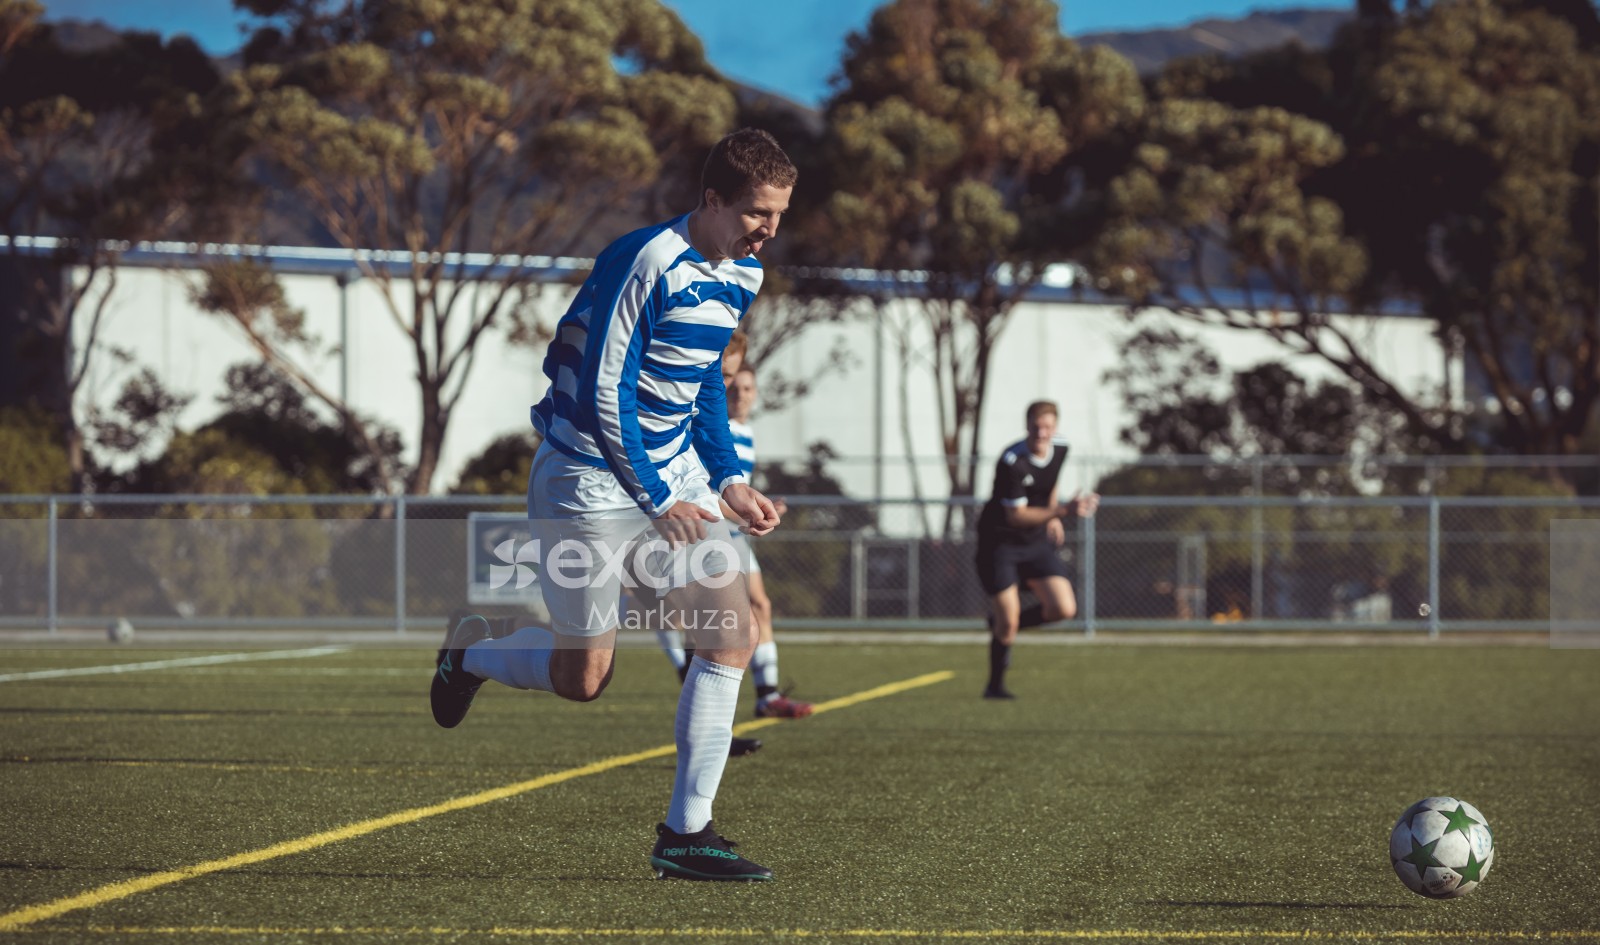 Player sticking out tongue running - Sports Zone sunday league